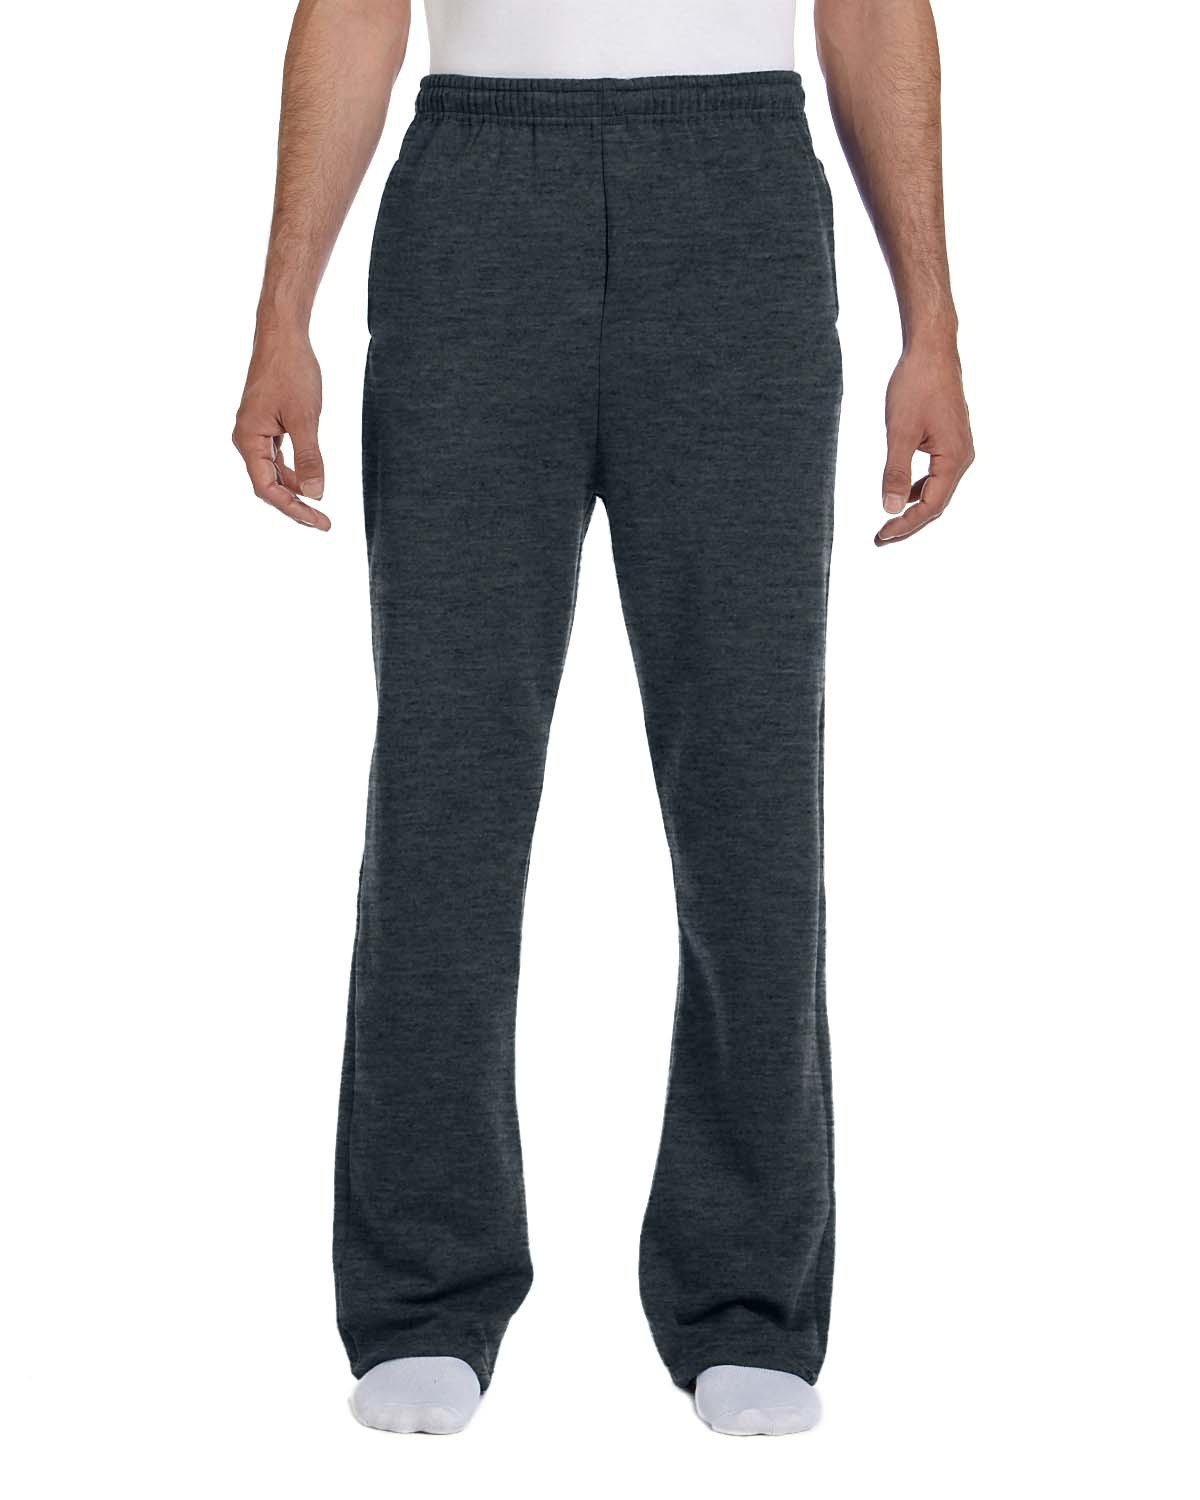 Russell Athletic Big and Tall Sweatpants for Men – Fleece Open